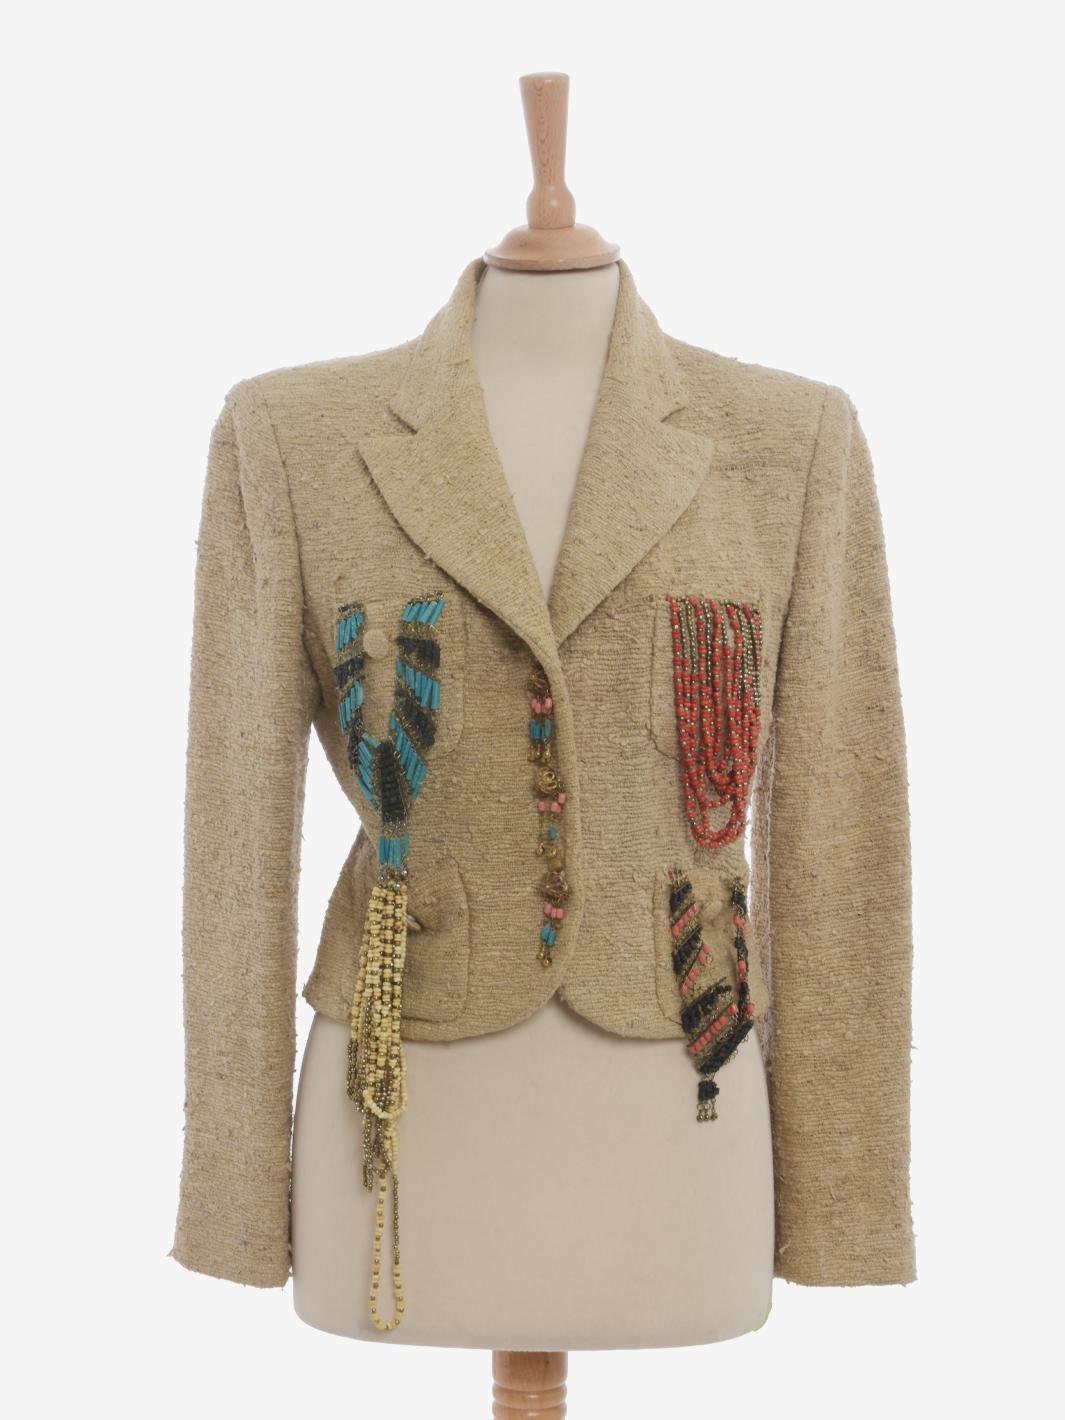 Moschino Couture Blazer With Pendants Decorations is a rare jacket featuring a textured woven silk fabric, three jewel button closure and four front pockets from which hang various decorations made of semi-precious stones and metal